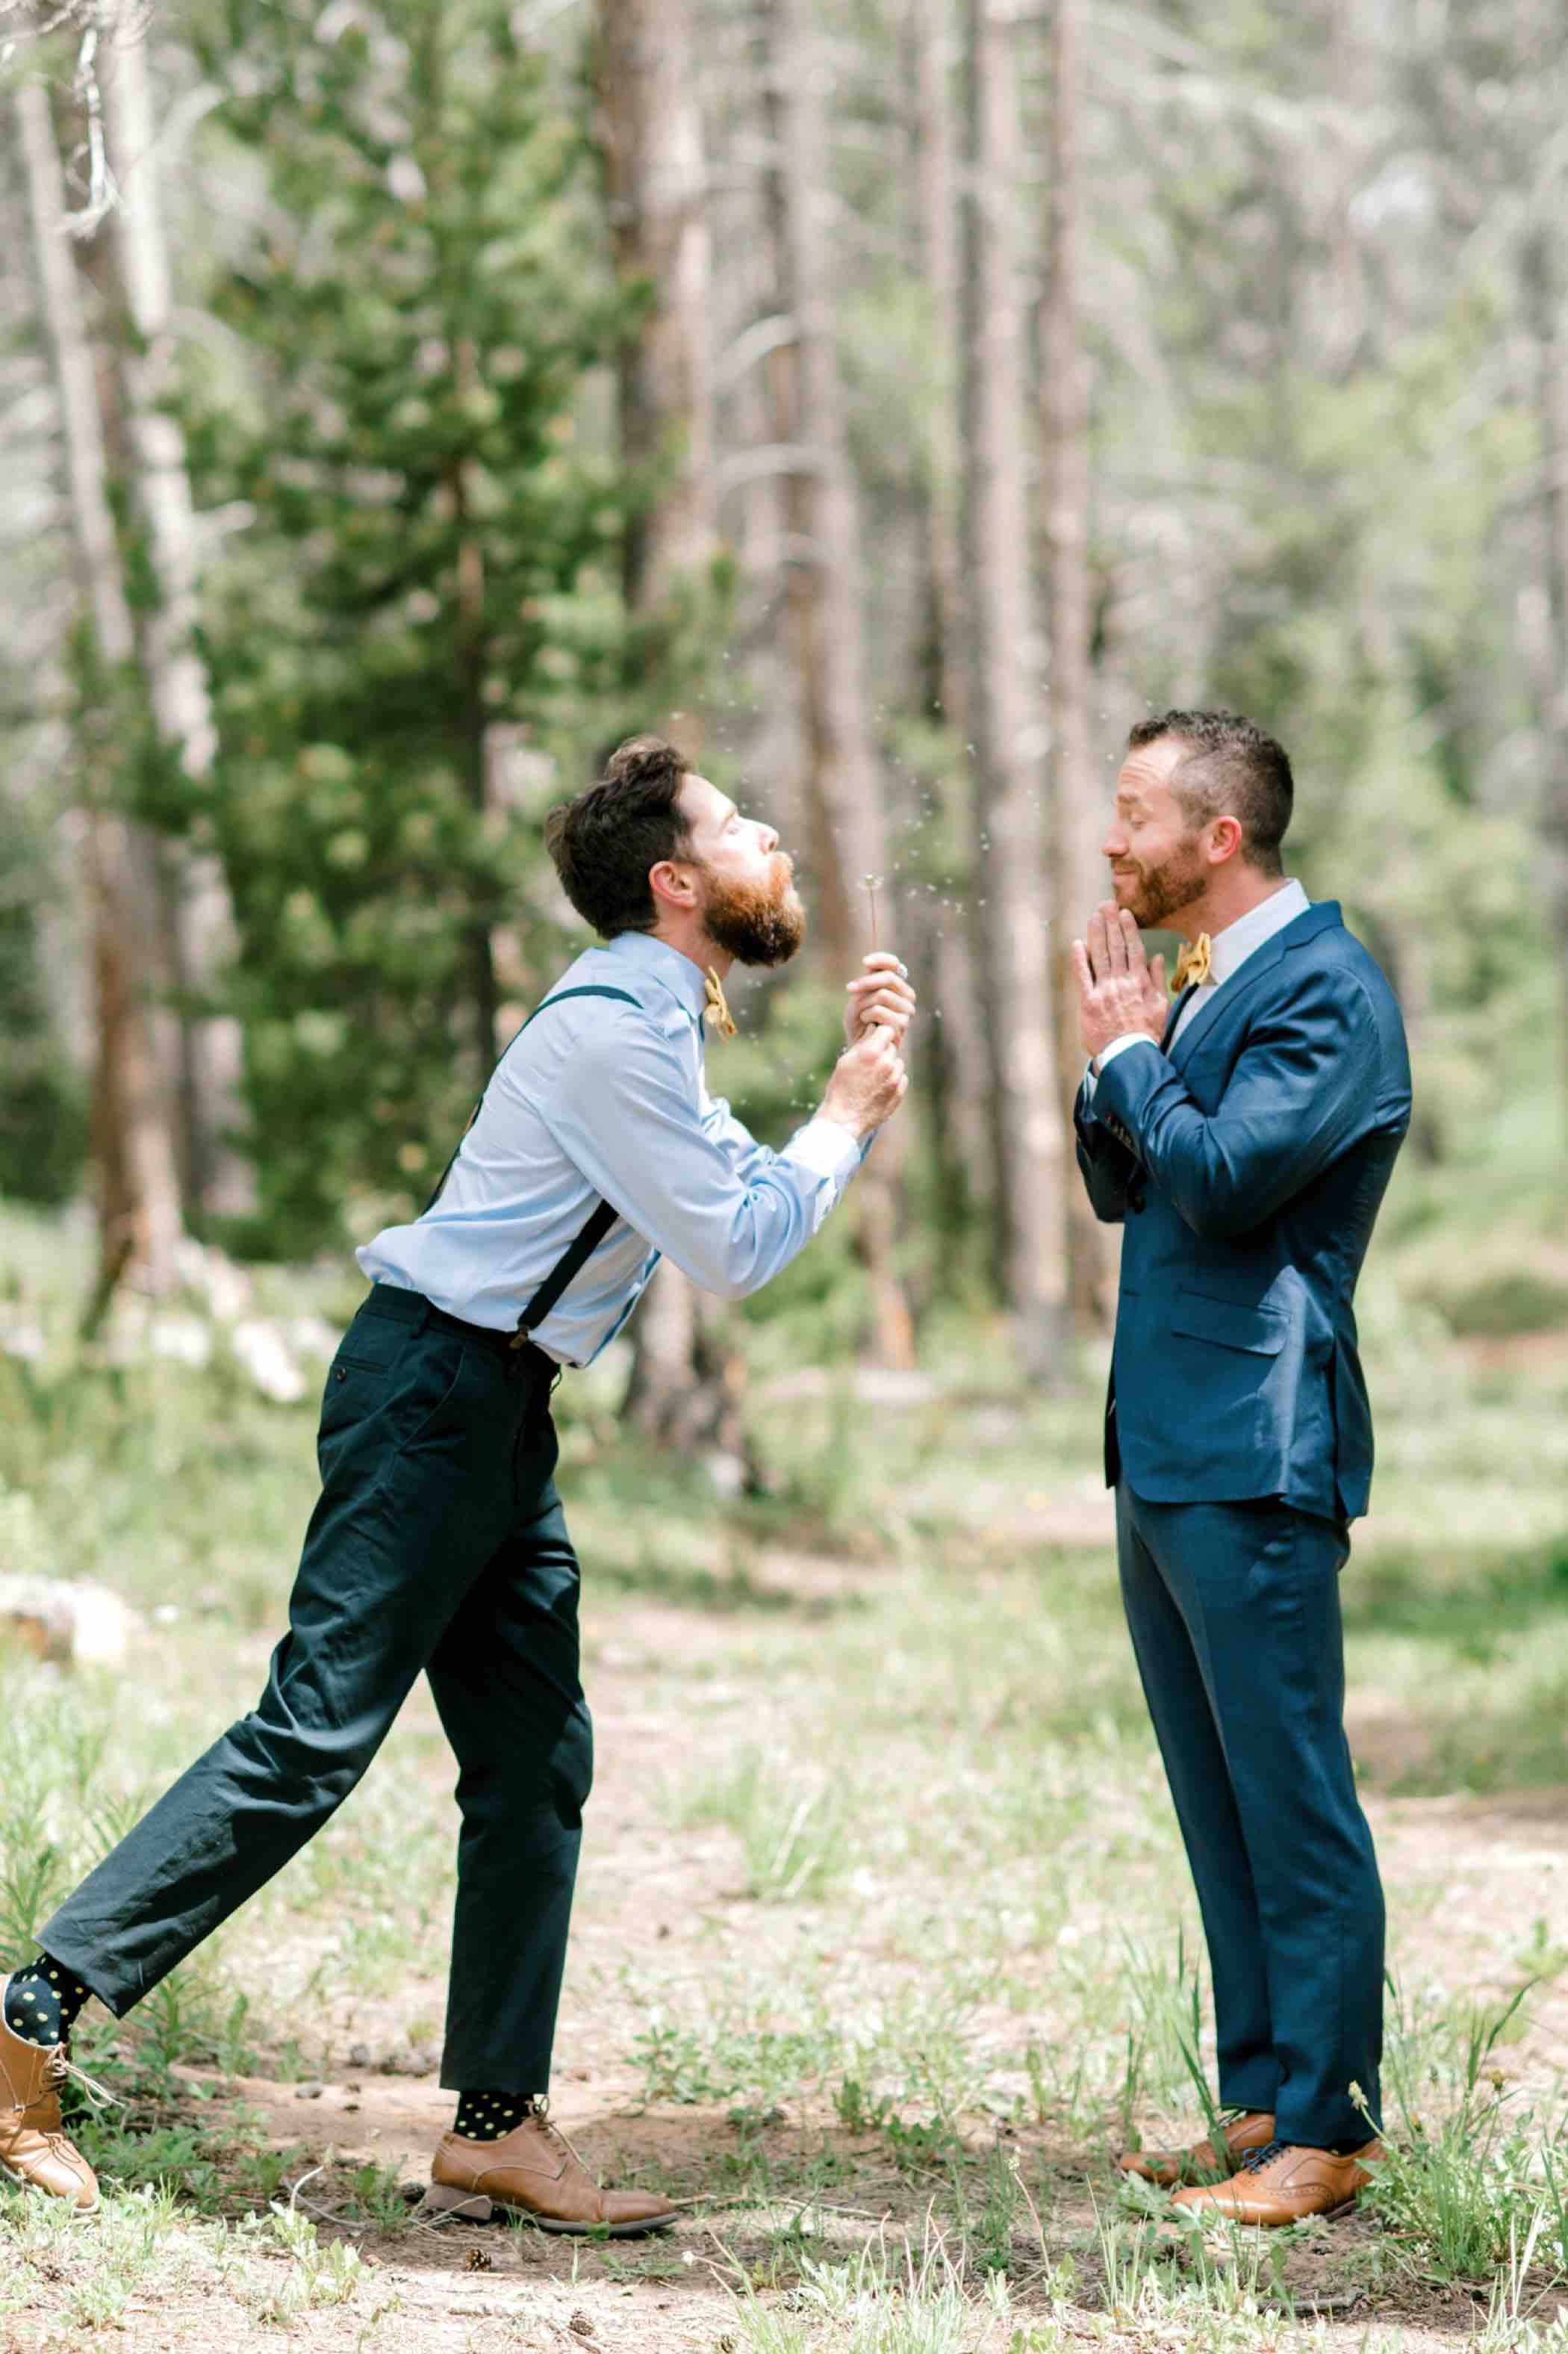 Faux fake proposal groomsmen photos outside Piney River Ranch in Vail in the Colorado Rocky Mountains. Photo by Ali and Garrett, Romantic, Adventurous, Nostalgic Wedding Photographers.